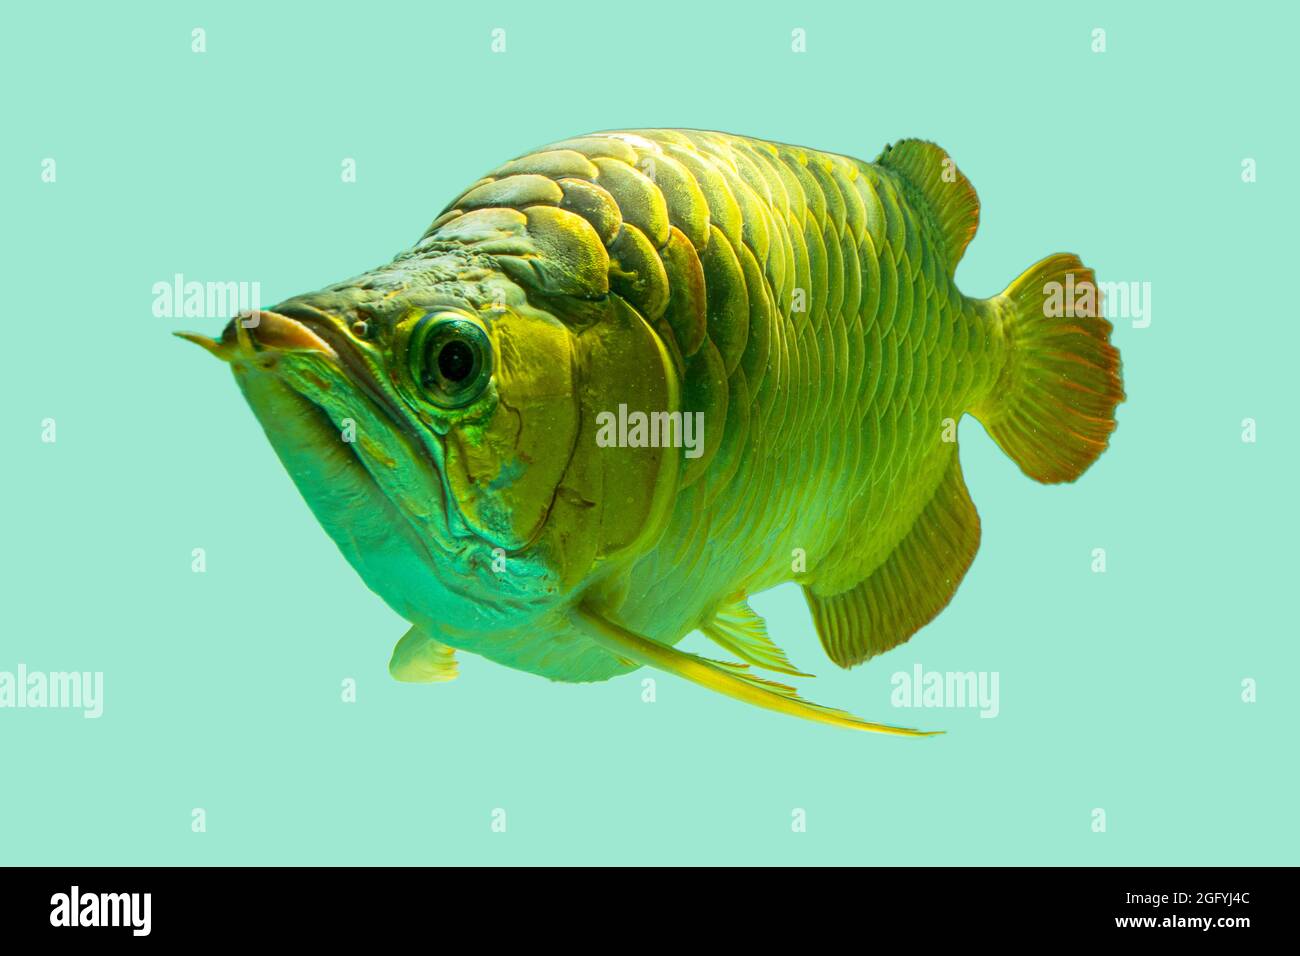 The Asian arowana, dragon fish (Scleropages formosus) on isolated blue background. The gold crossback, blue Malayan is freshwater fish native in Penin Stock Photo